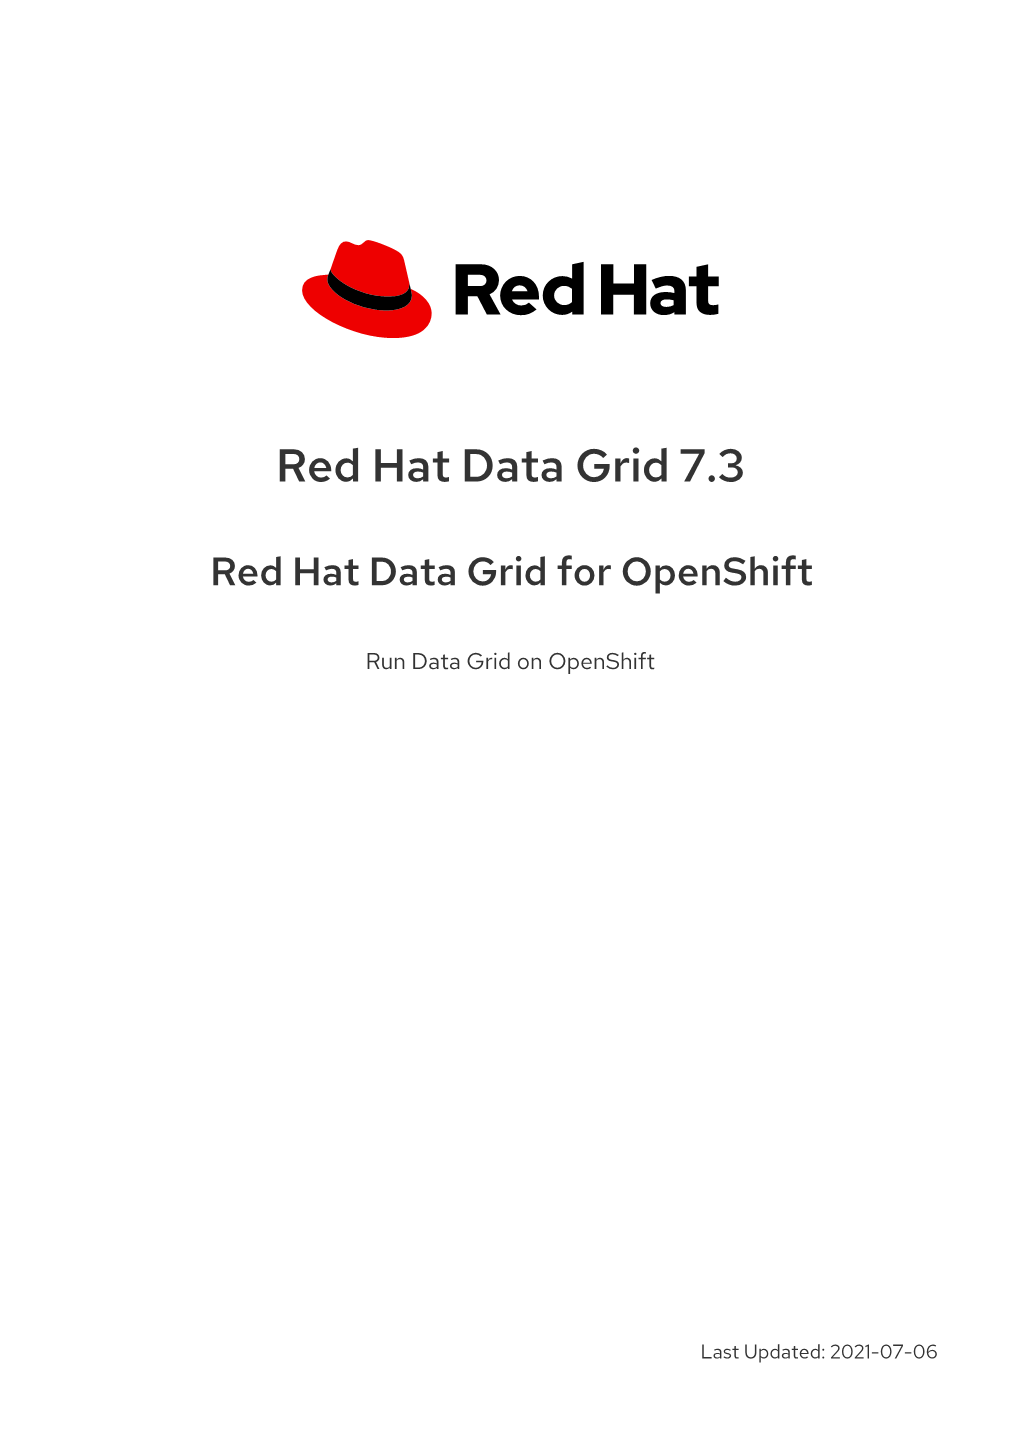 Red Hat Data Grid for Openshift